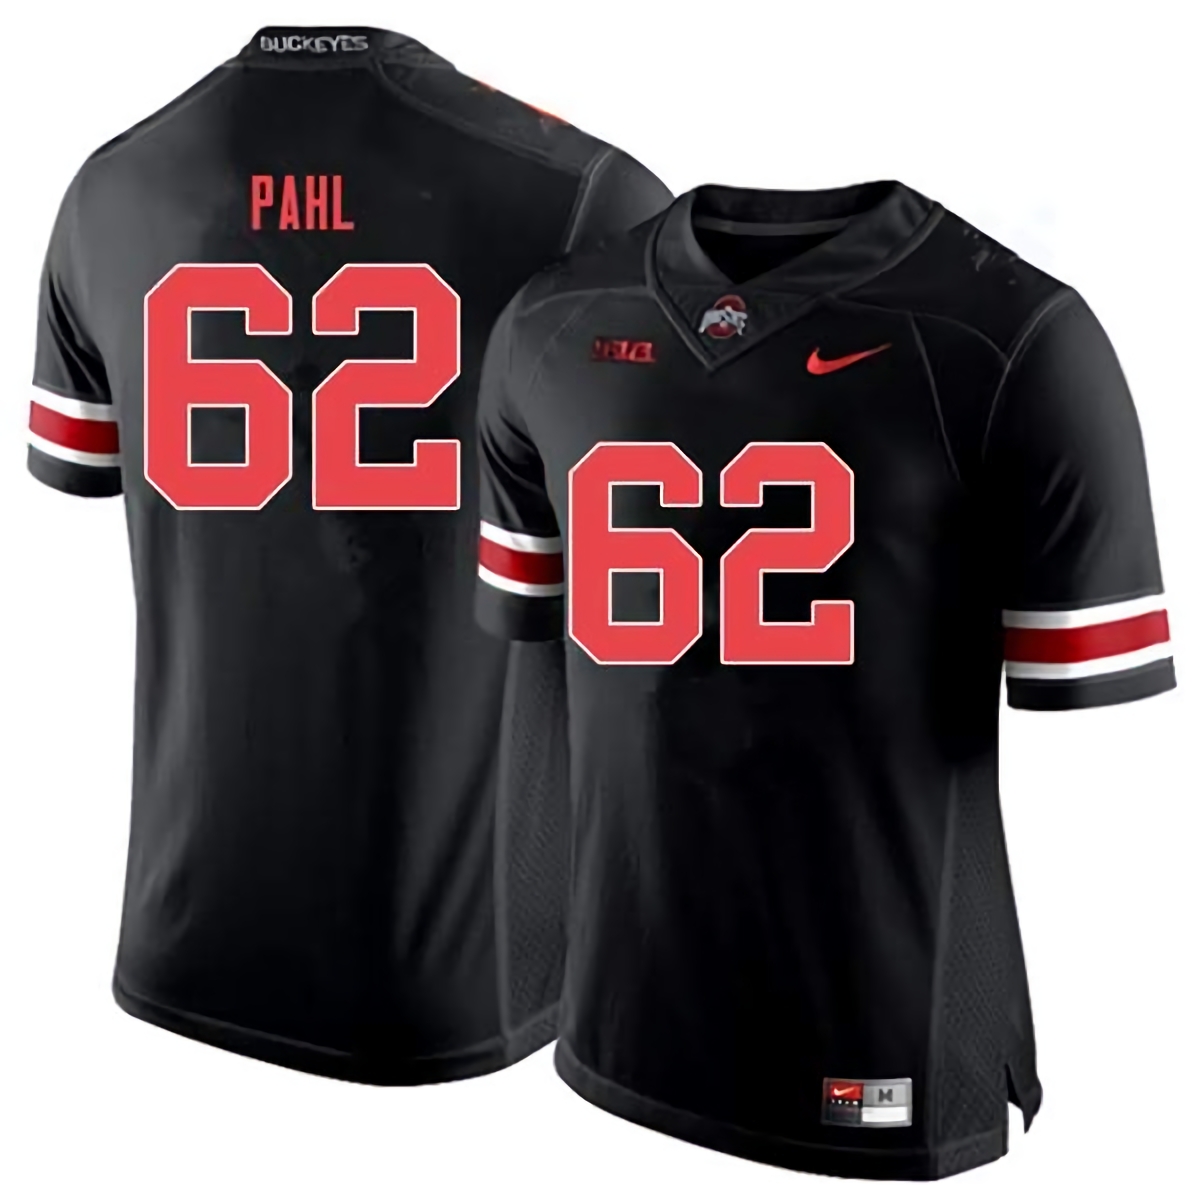 Brandon Pahl Ohio State Buckeyes Men's NCAA #62 Nike Black Out College Stitched Football Jersey HYZ4556QI